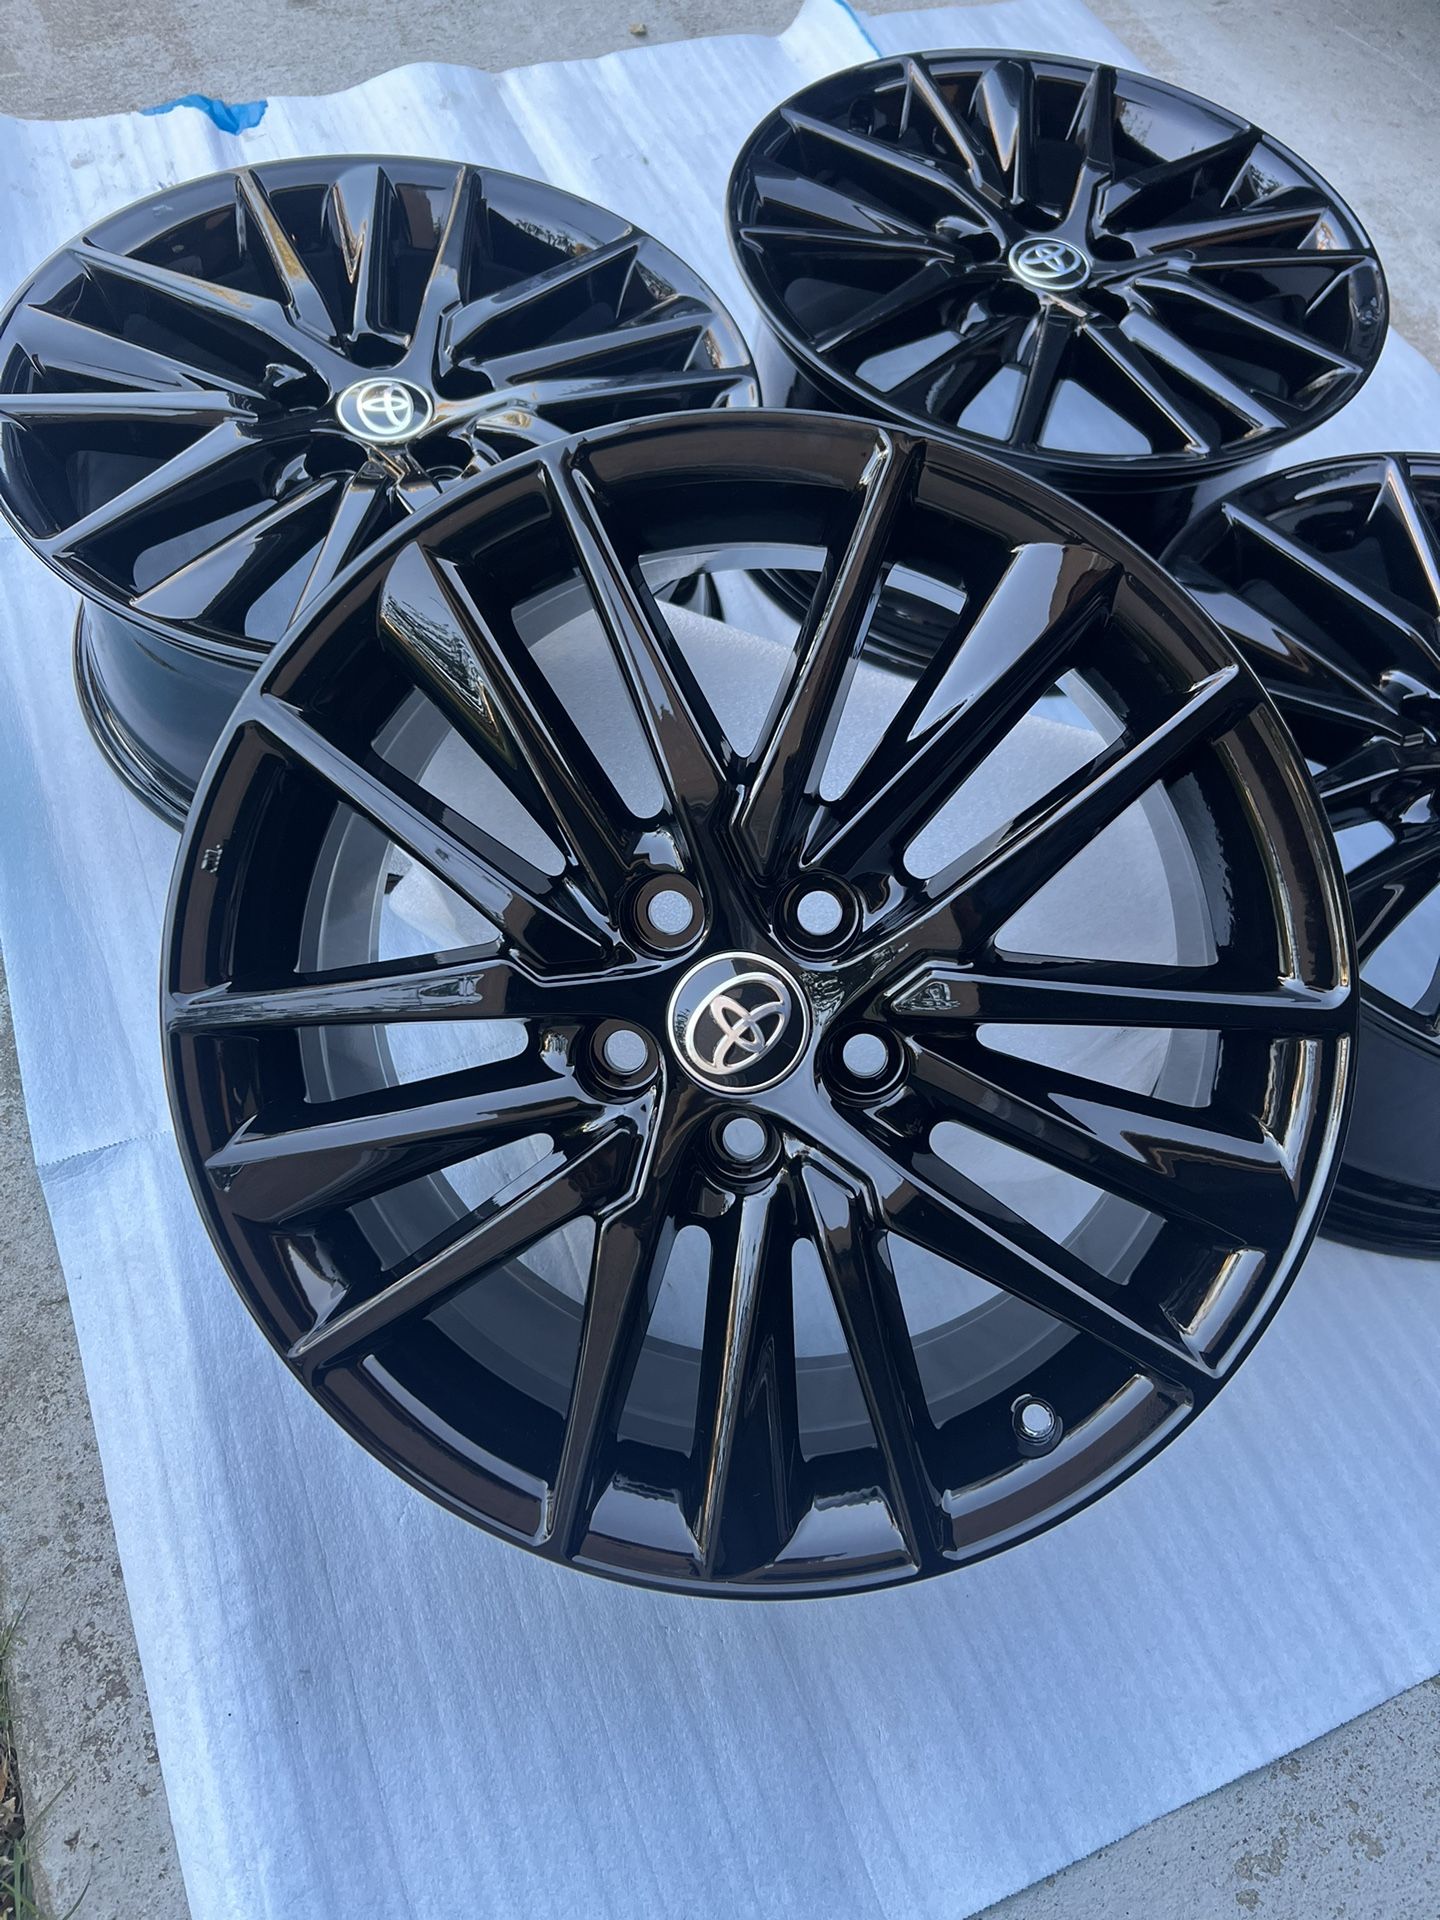 Toyota Camry Rims 18” Rines Oem Factory Wheels Fits Camry Avalon Prius 5X114.3 New Gloss Black Powder Coated 